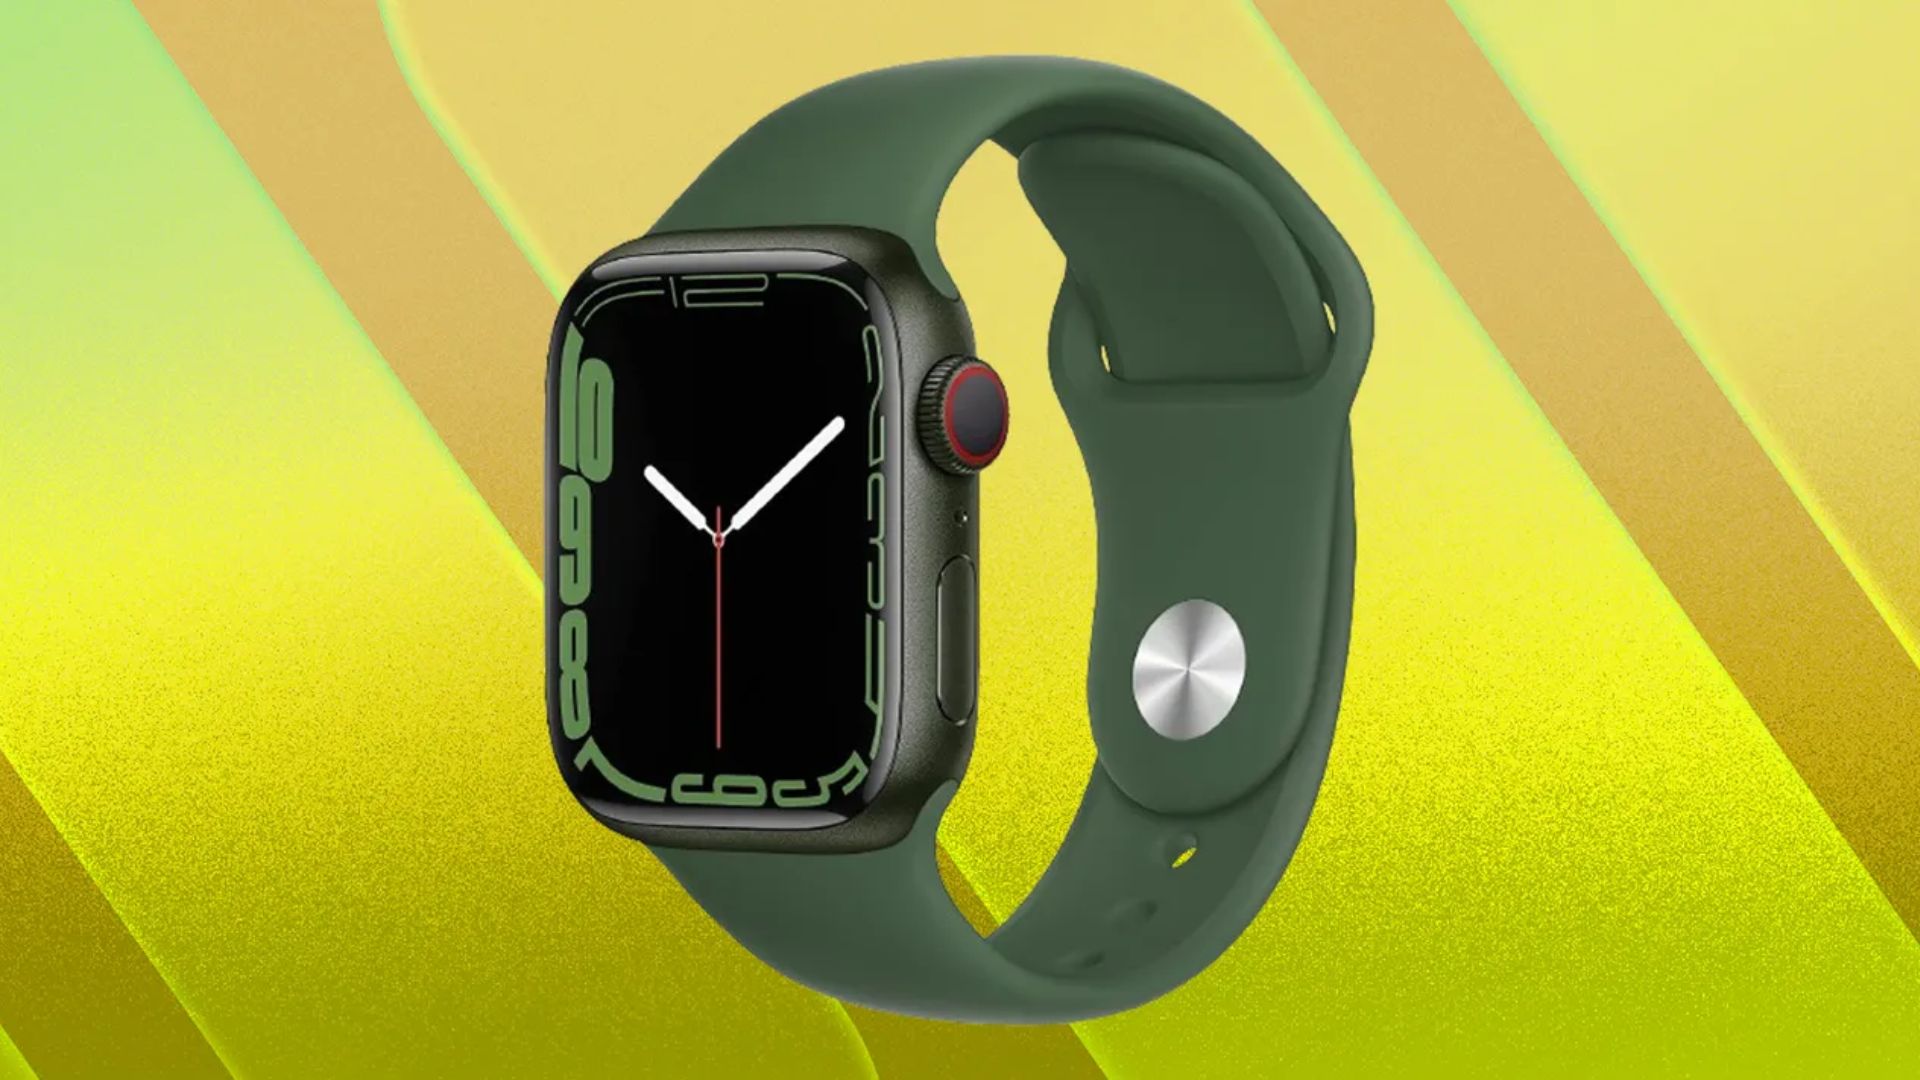 This Apple Watch Series 7 Black Friday deal for 52% off is still live on Amazon